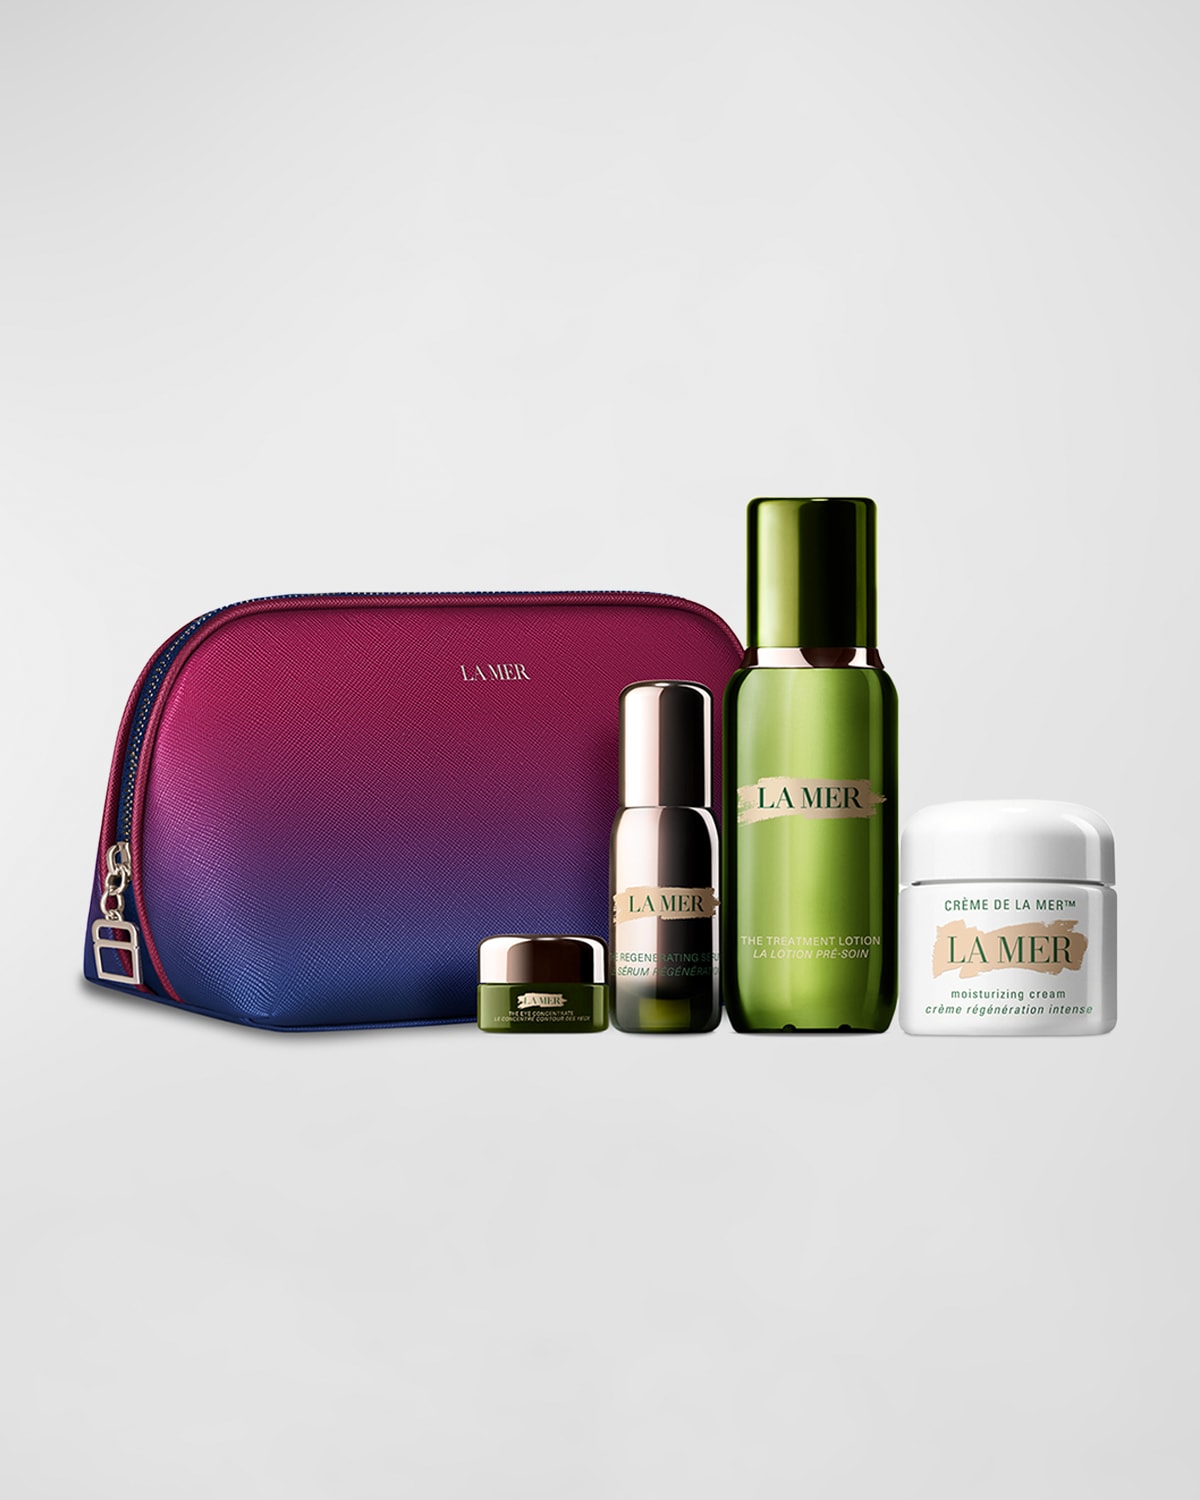 Limited Edition Energize and Replenish Collection ($784 Value)